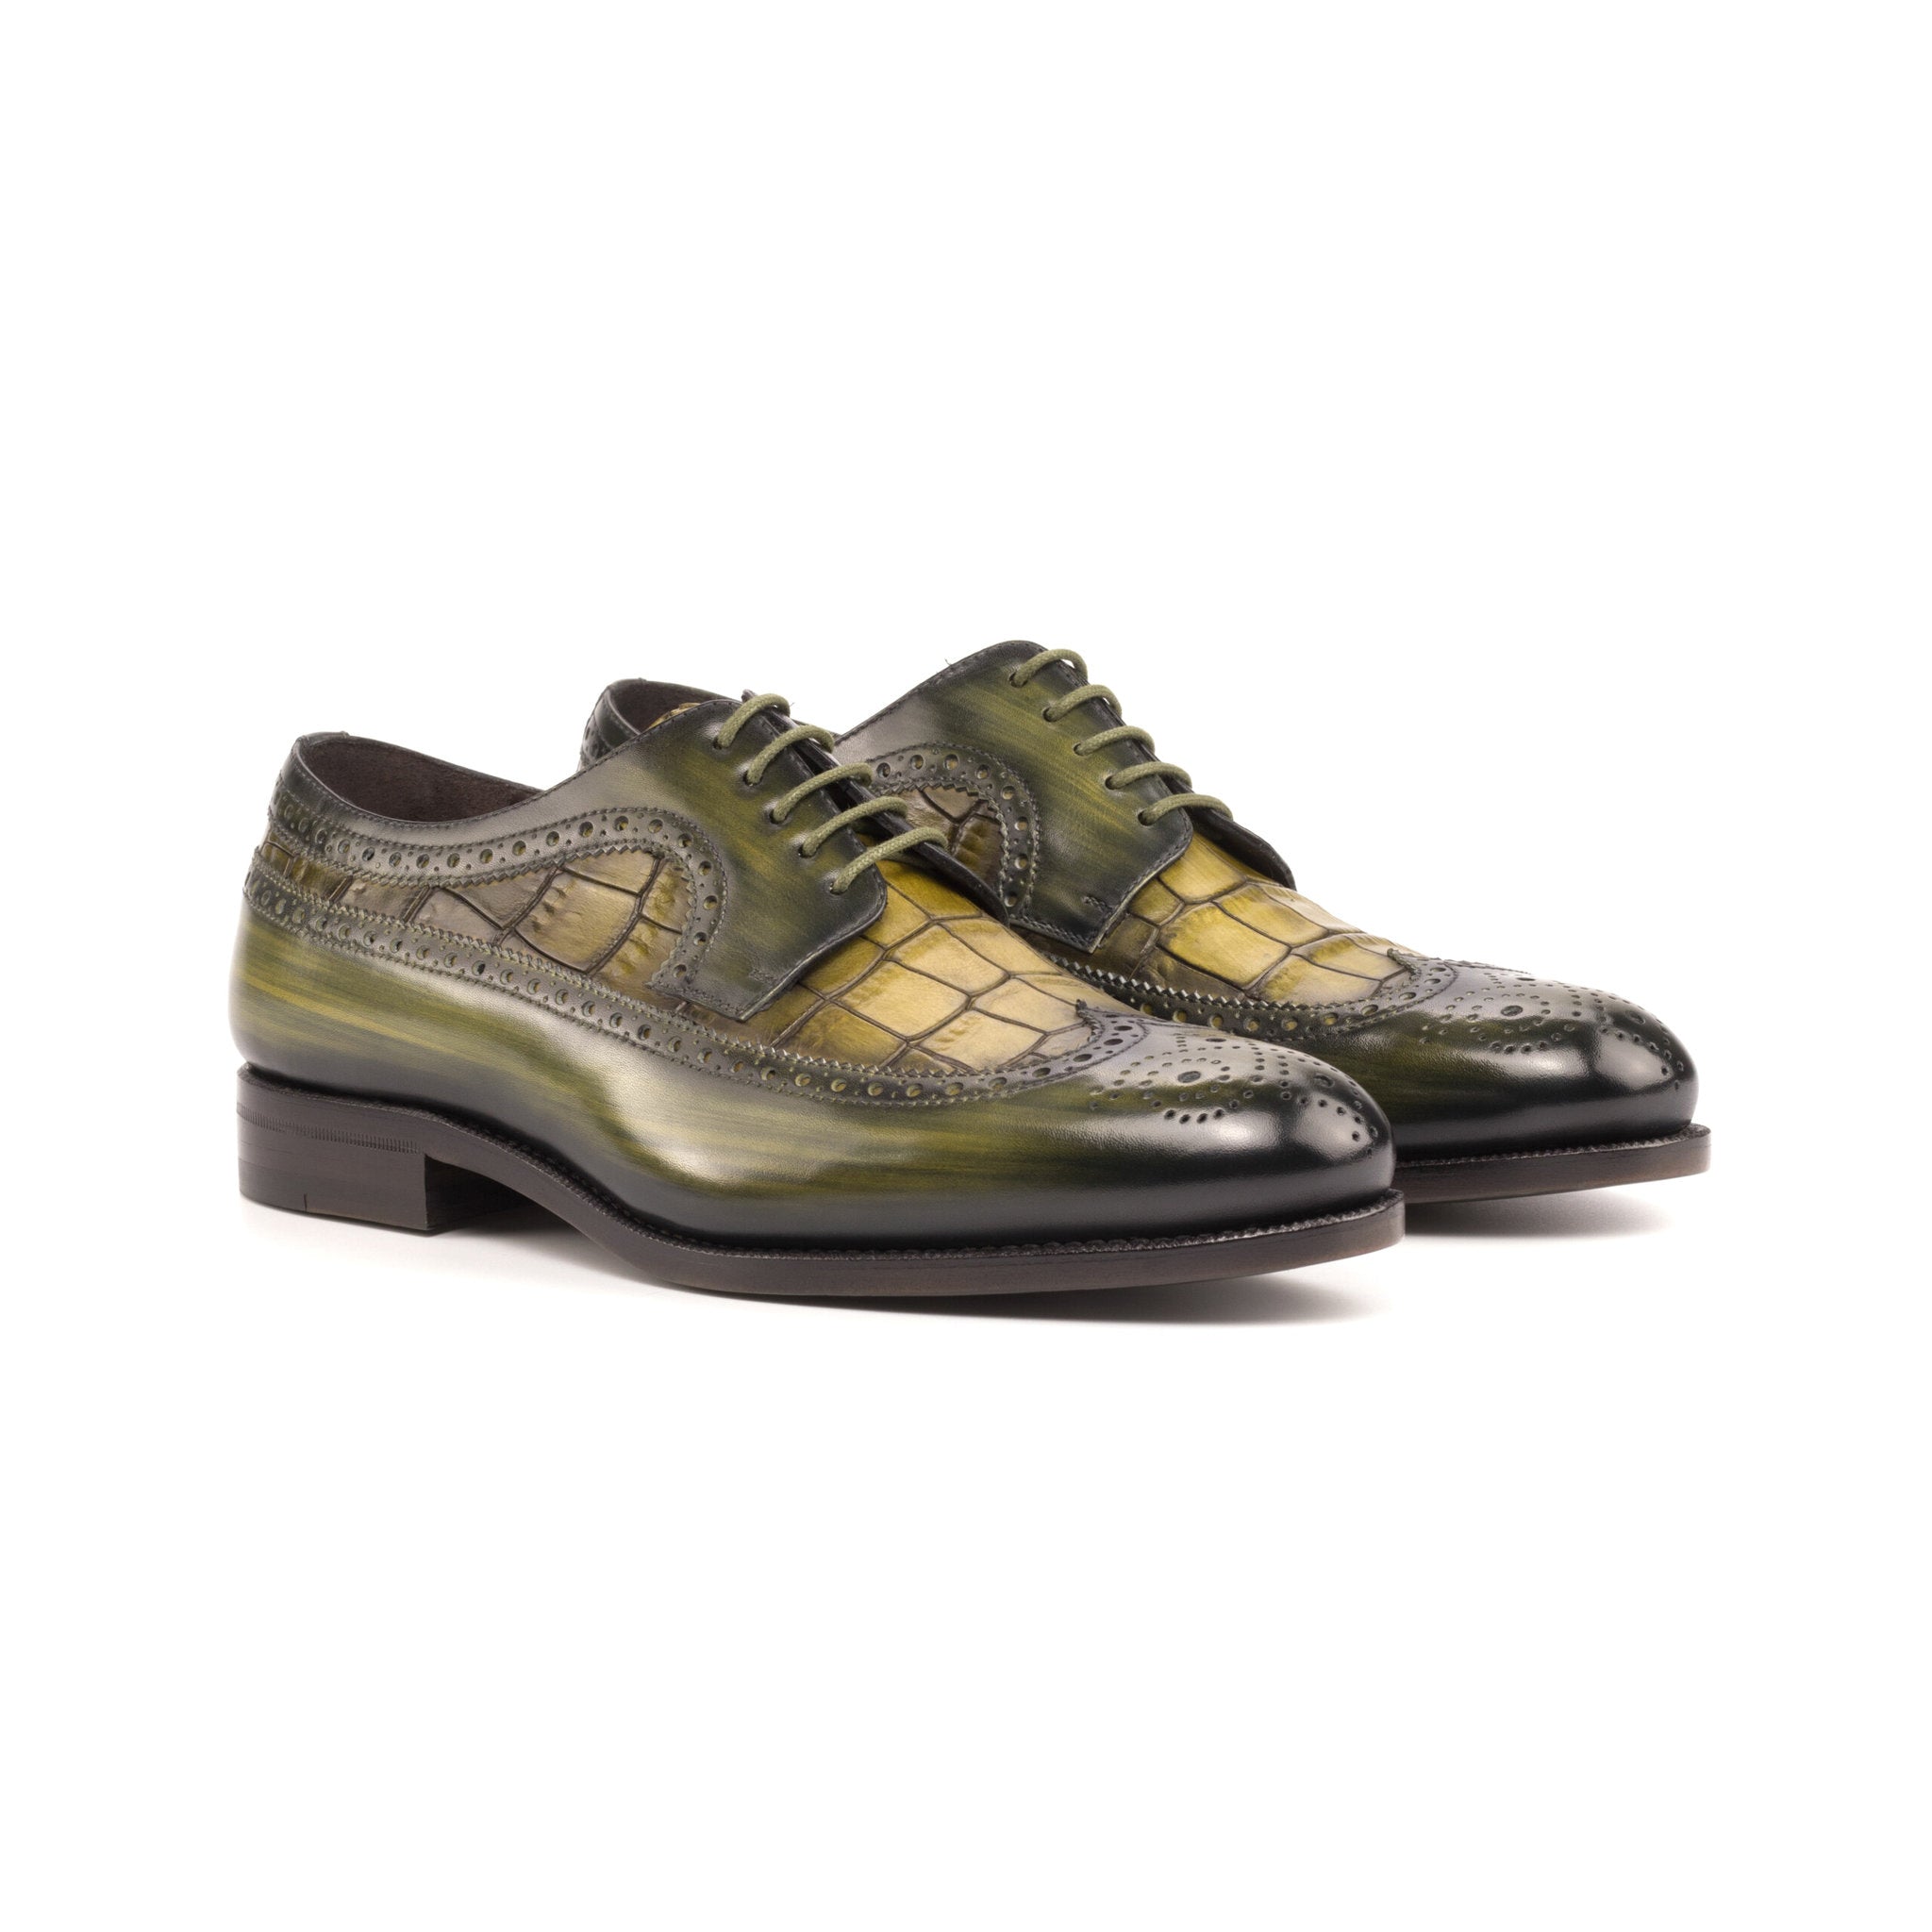 Green Patina Blucher Shoes with Croco